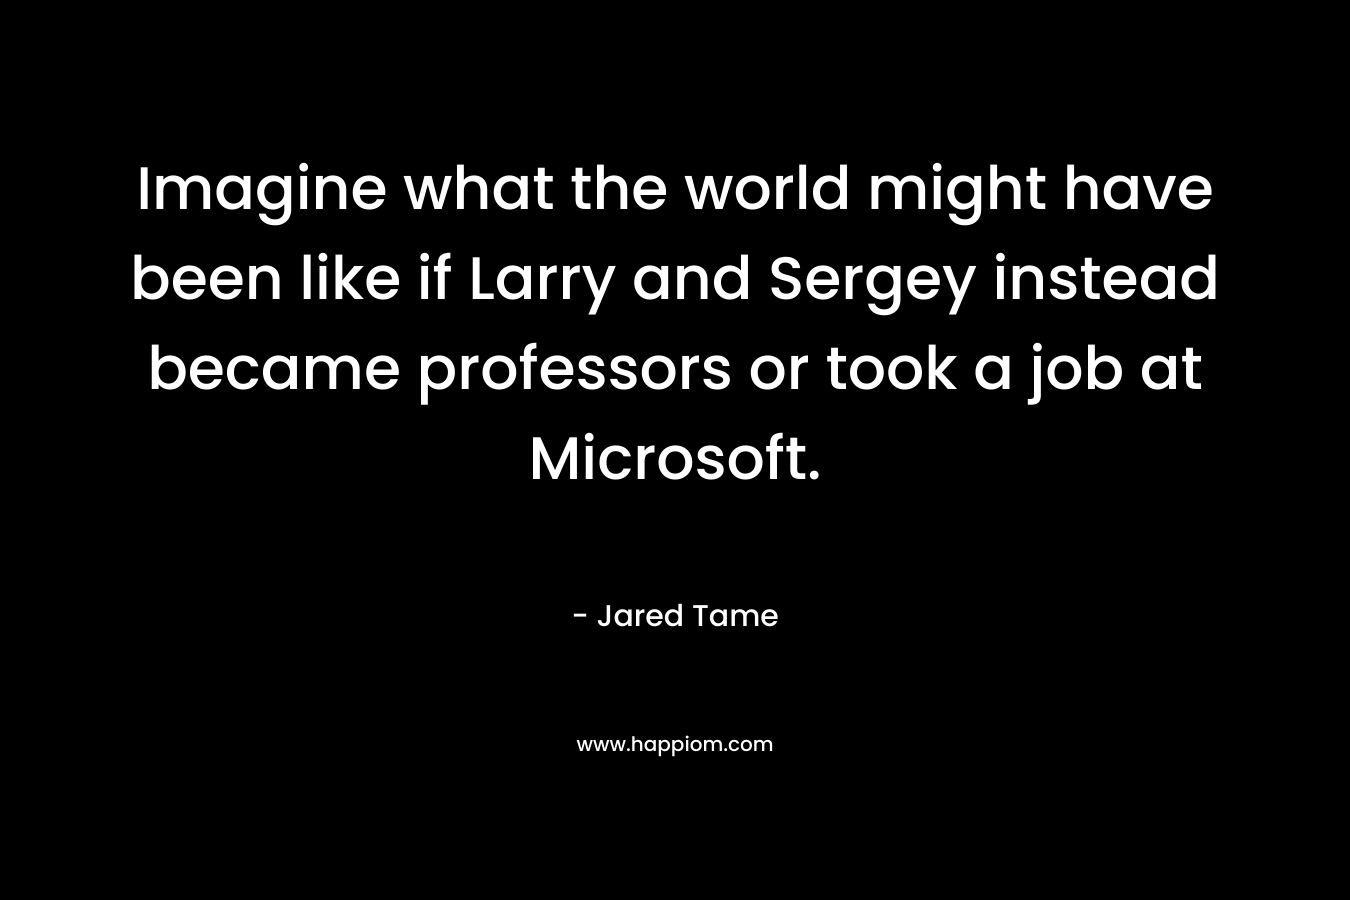 Imagine what the world might have been like if Larry and Sergey instead became professors or took a job at Microsoft.